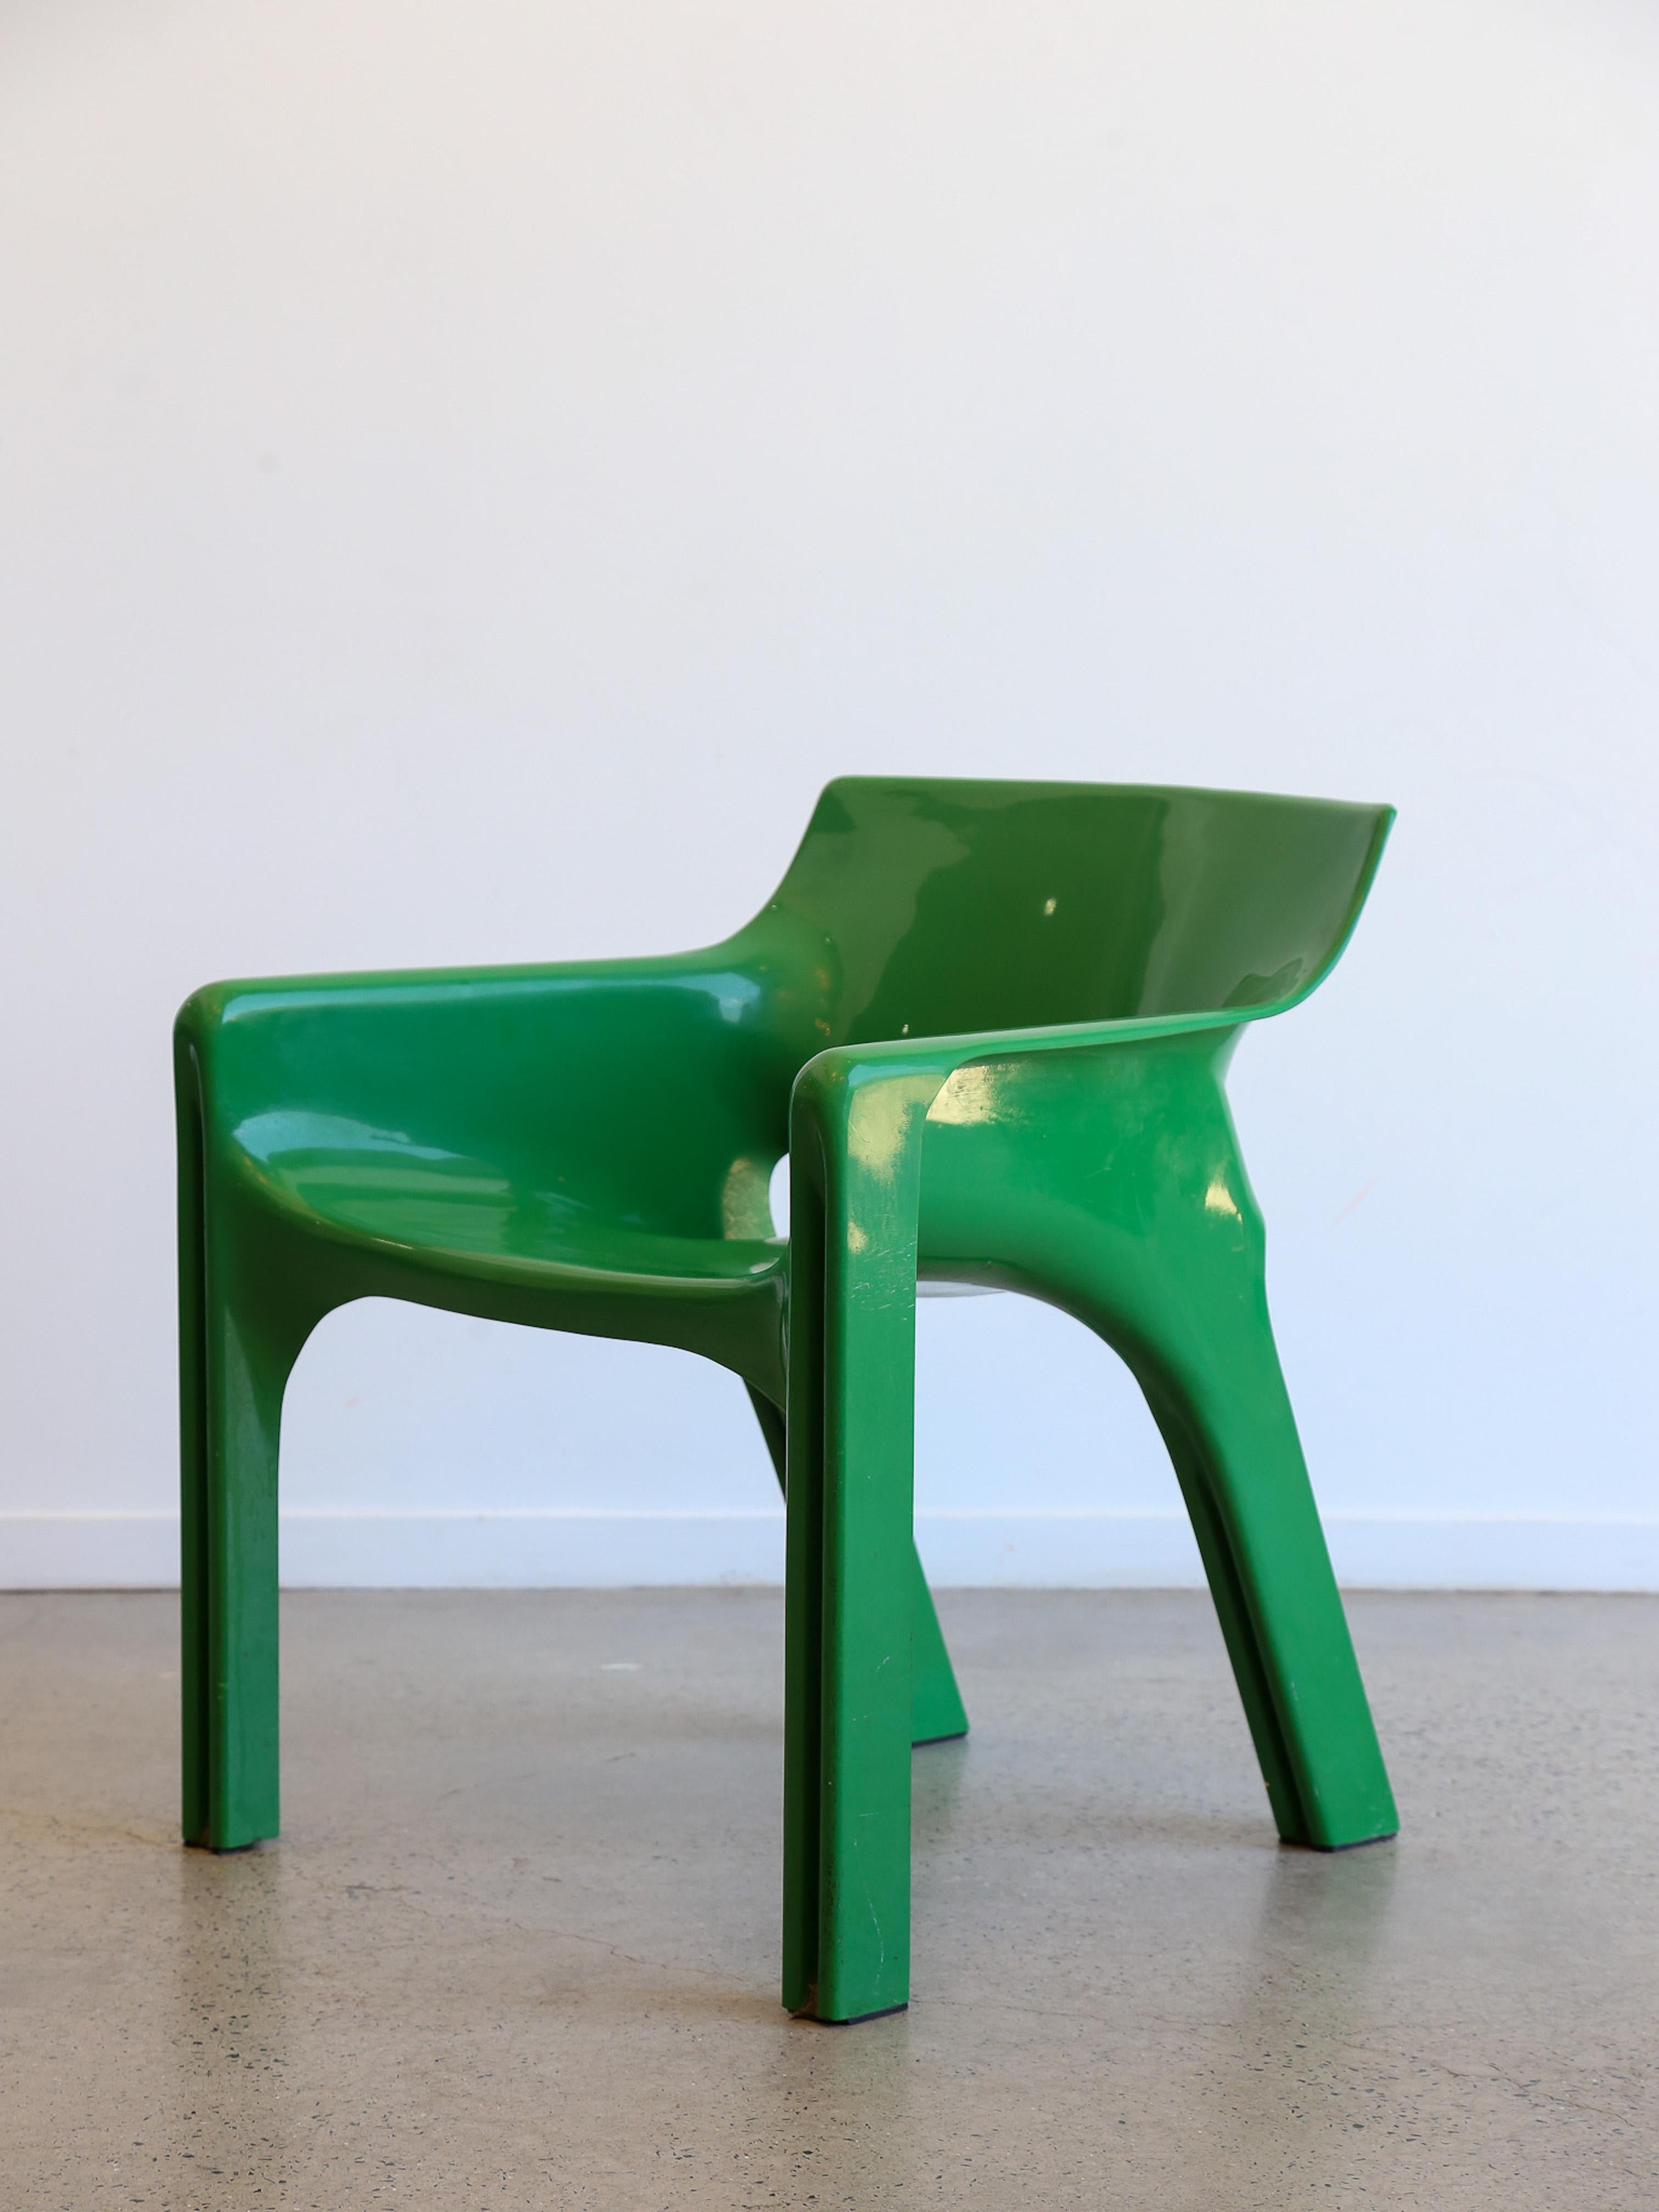 Late 20th Century Gaudi Green Chair by Vico Magistretti for Artemide 1970s